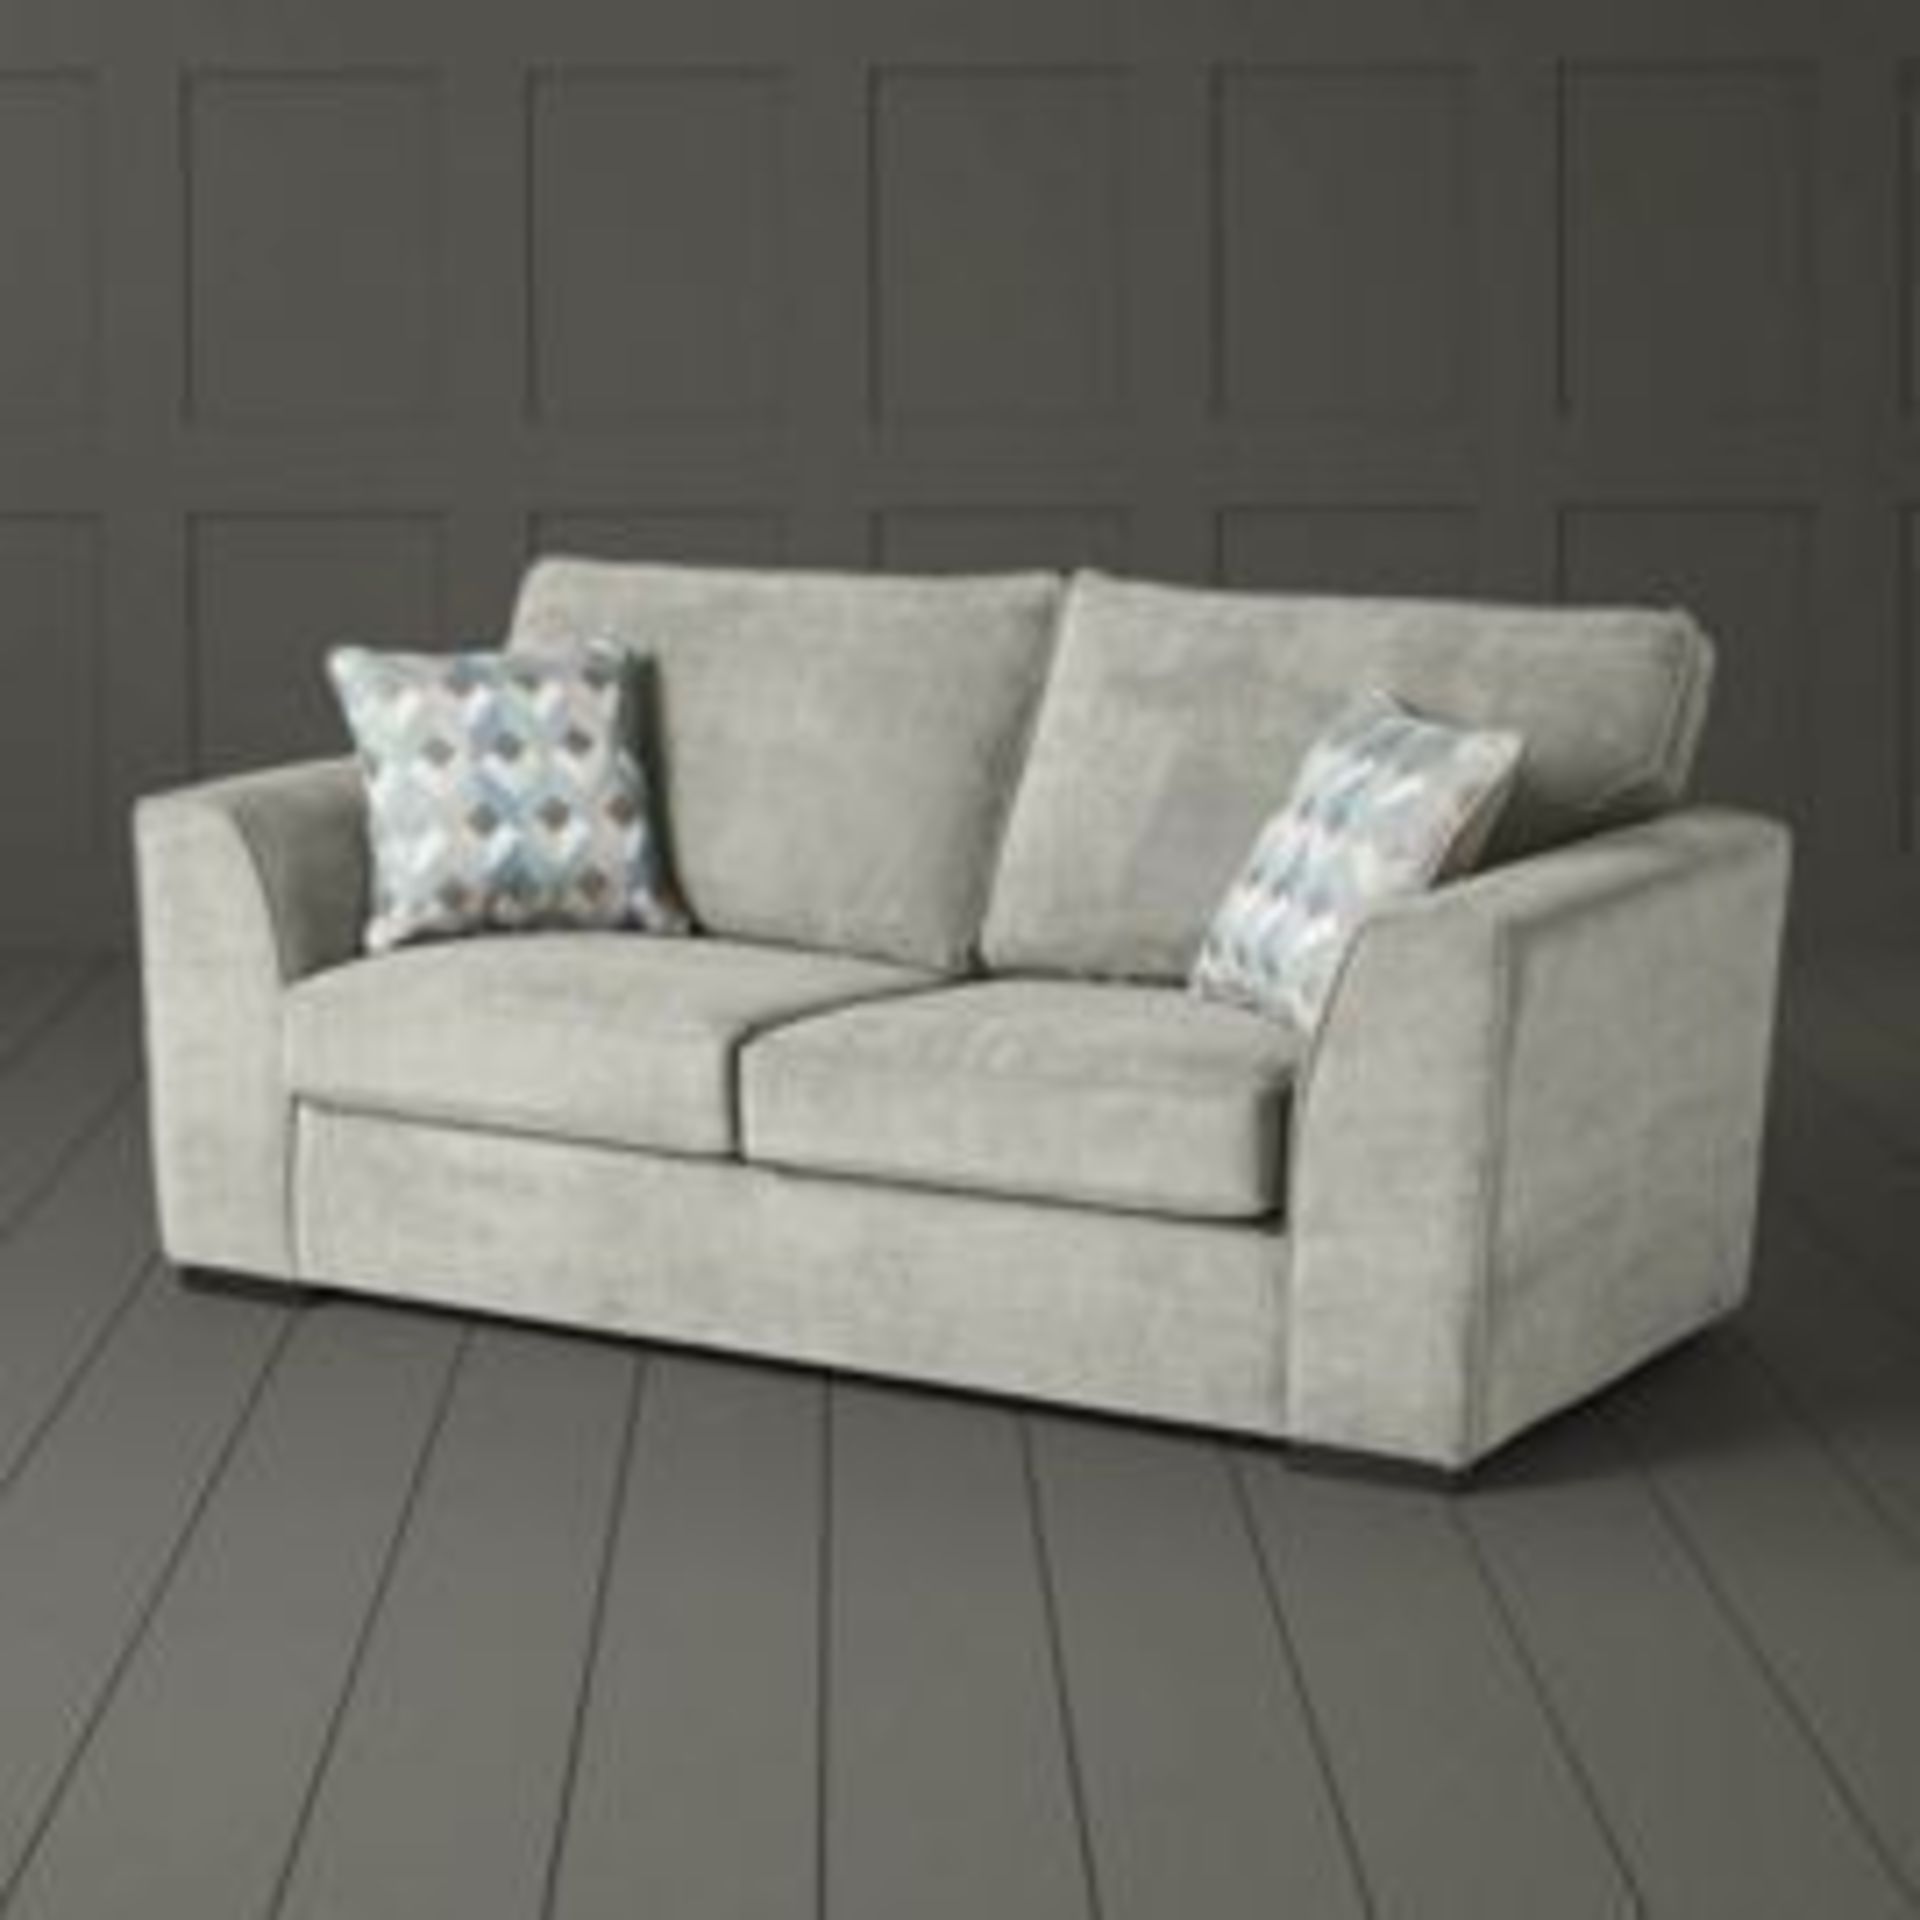 1 BRAND NEW BAGGED BOSTON MEDIUM 2.5 SEATER SOFA IN LIGHT GREY / CTS07907 (VIEWING HIGHLY